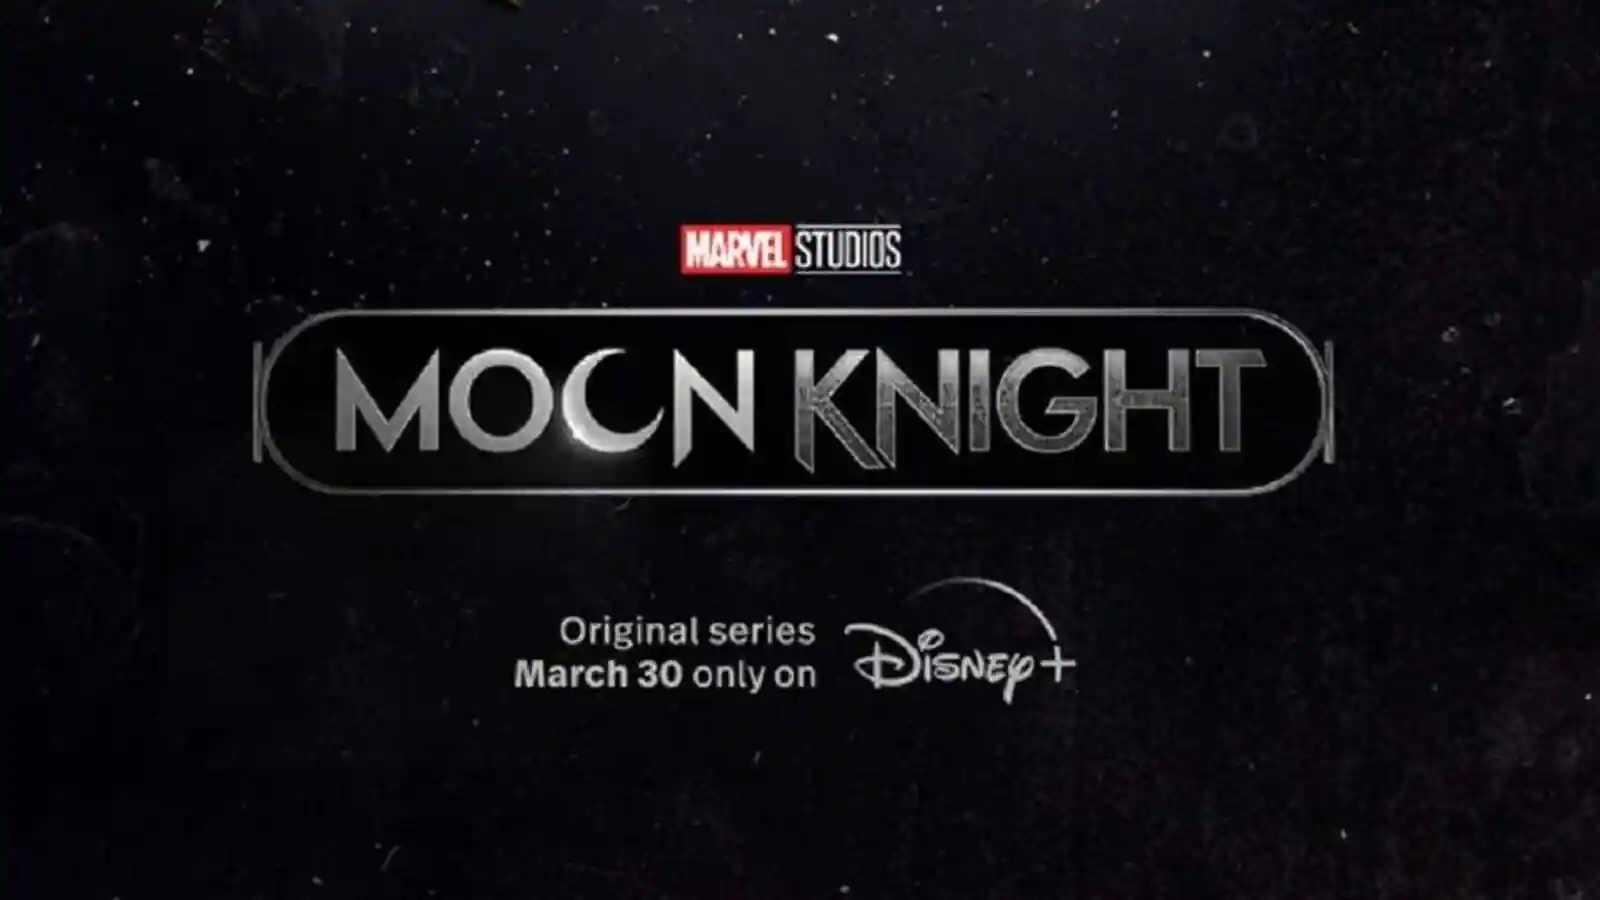 Marvel’s Moon Knight is now available to stream on Disney+